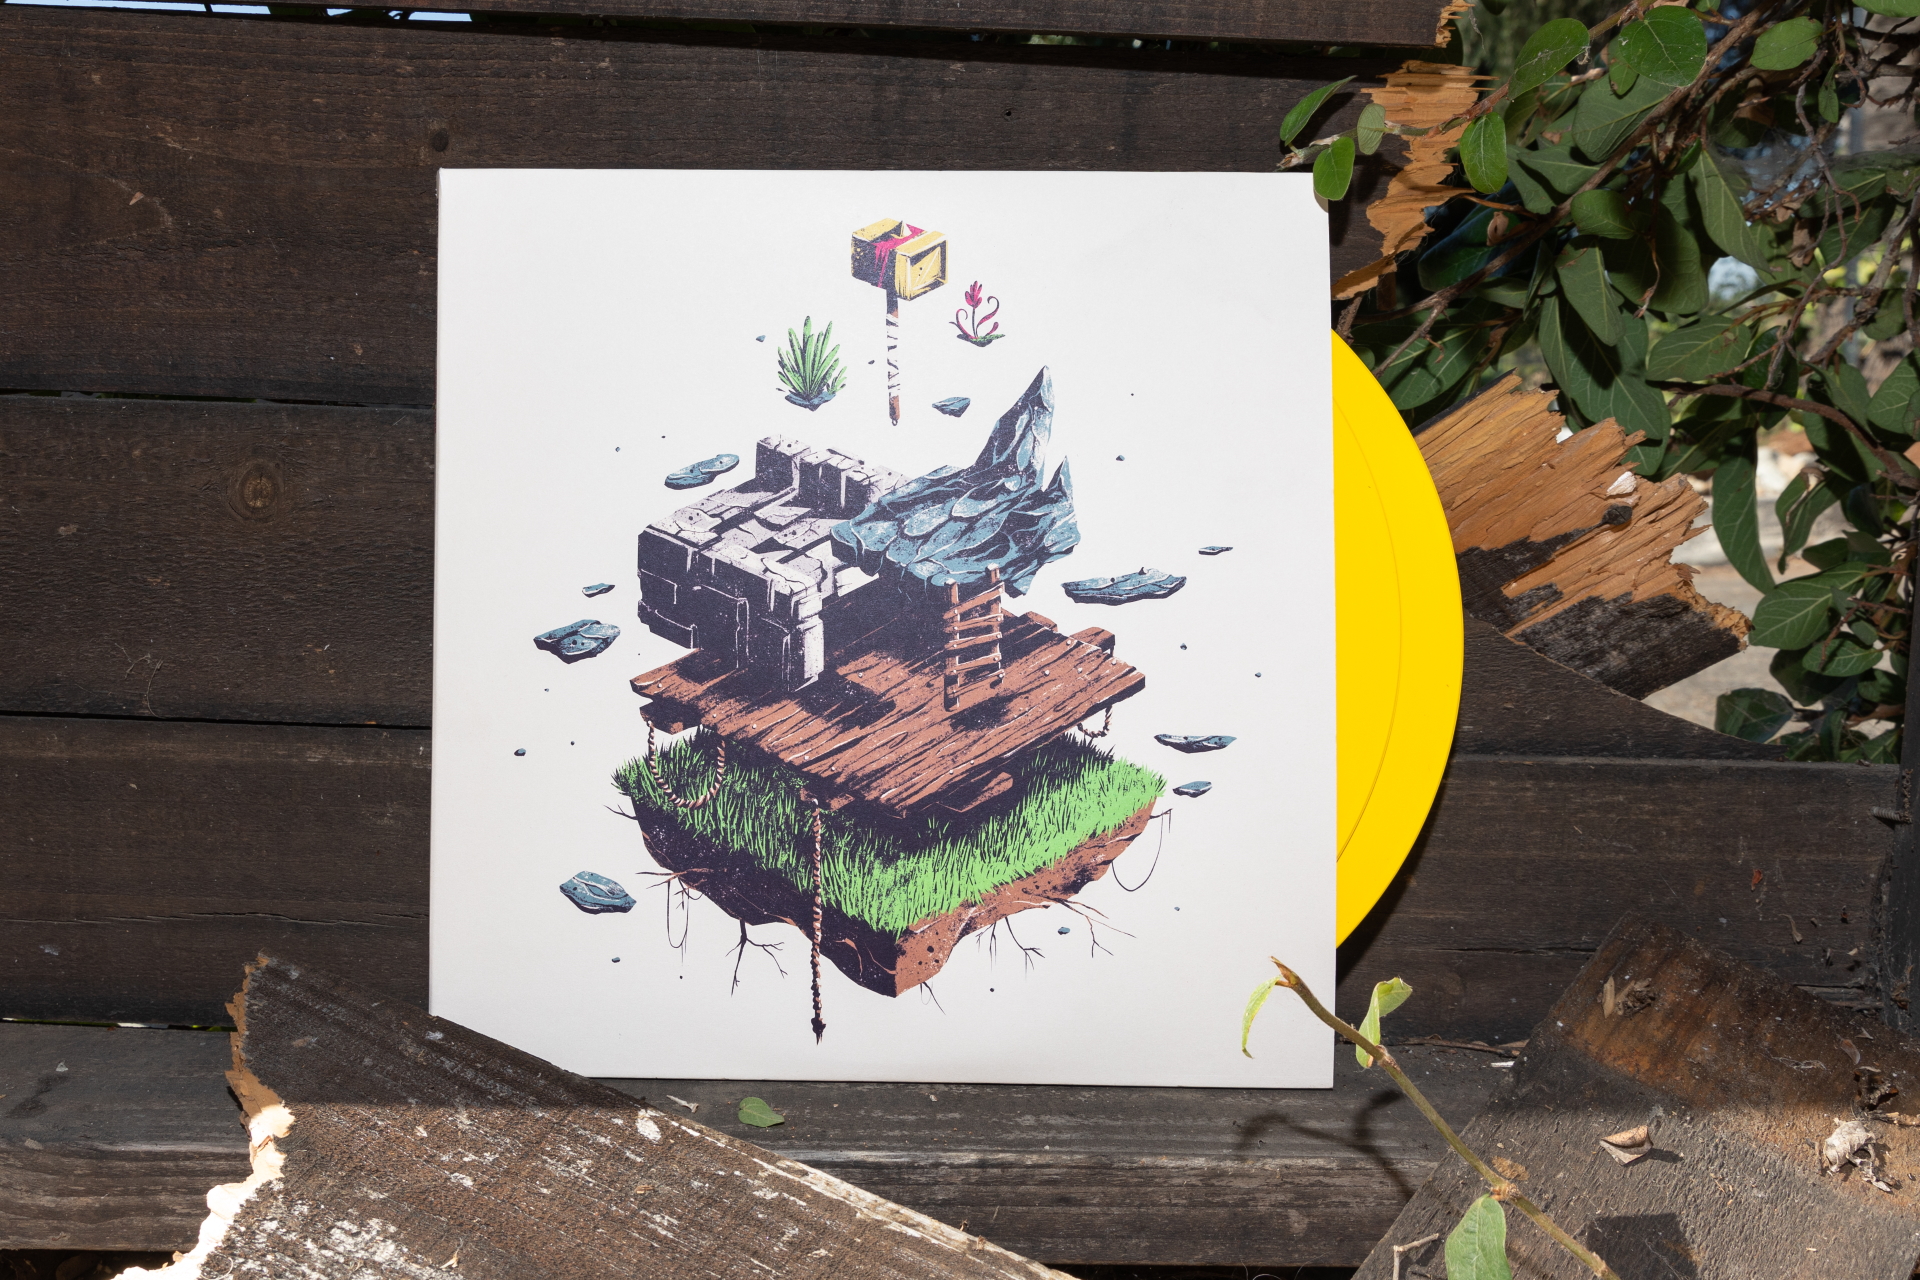 iam8bit: Video Game Collectibles, Vinyl Soundtracks, Art, and More